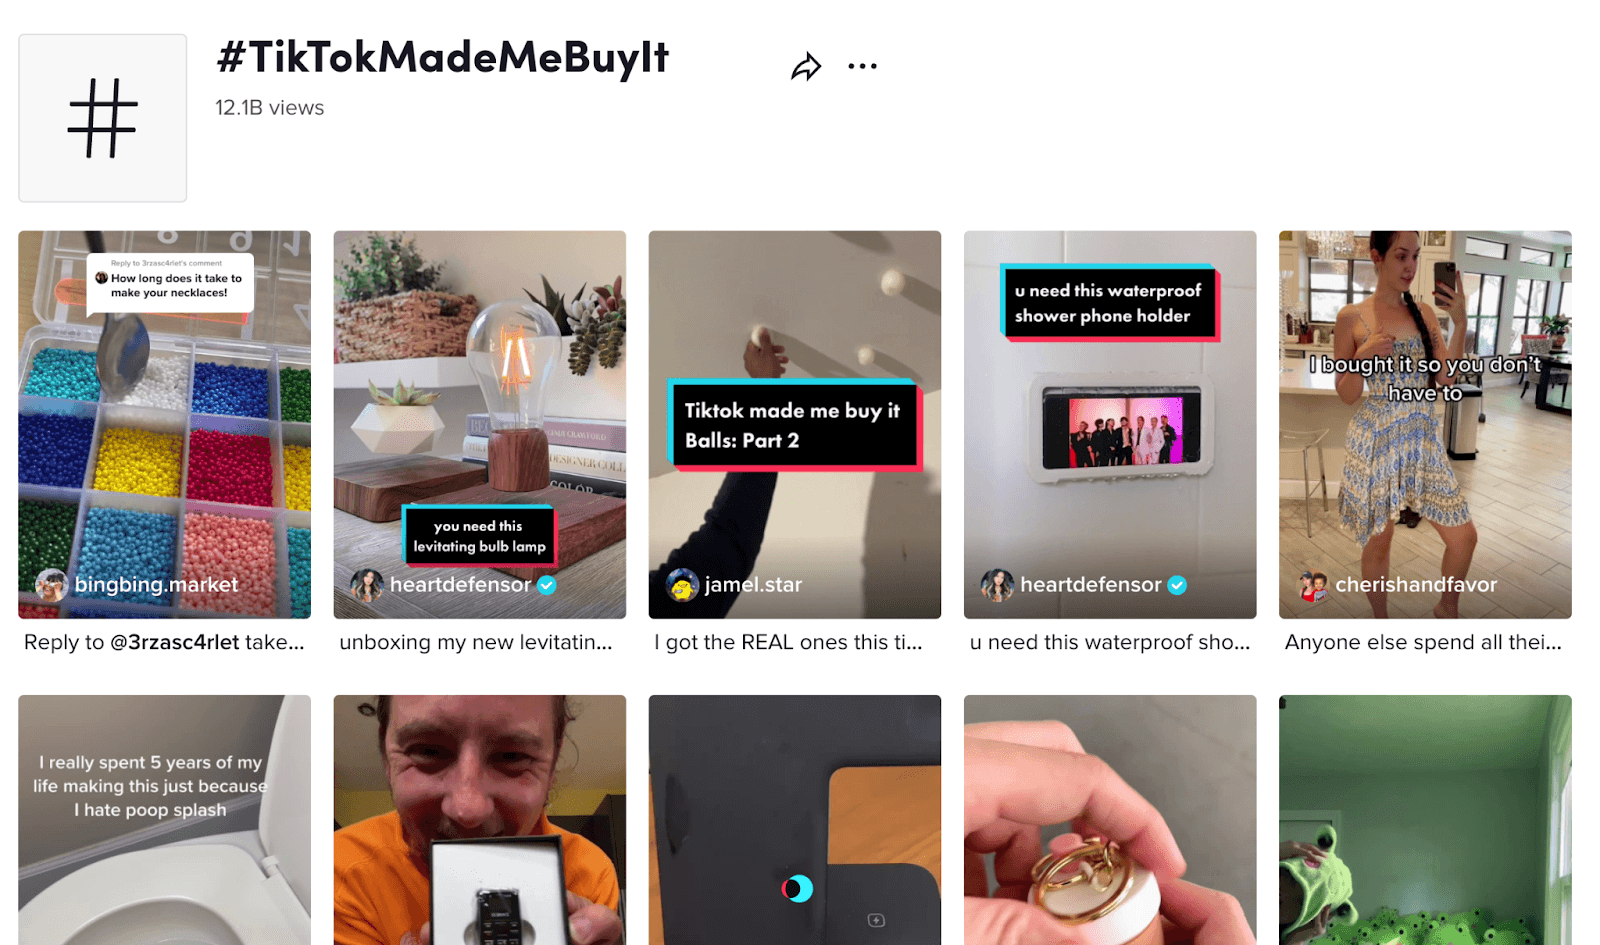 Different videos posting with the hashtag TikTokMadeMeBuyIt